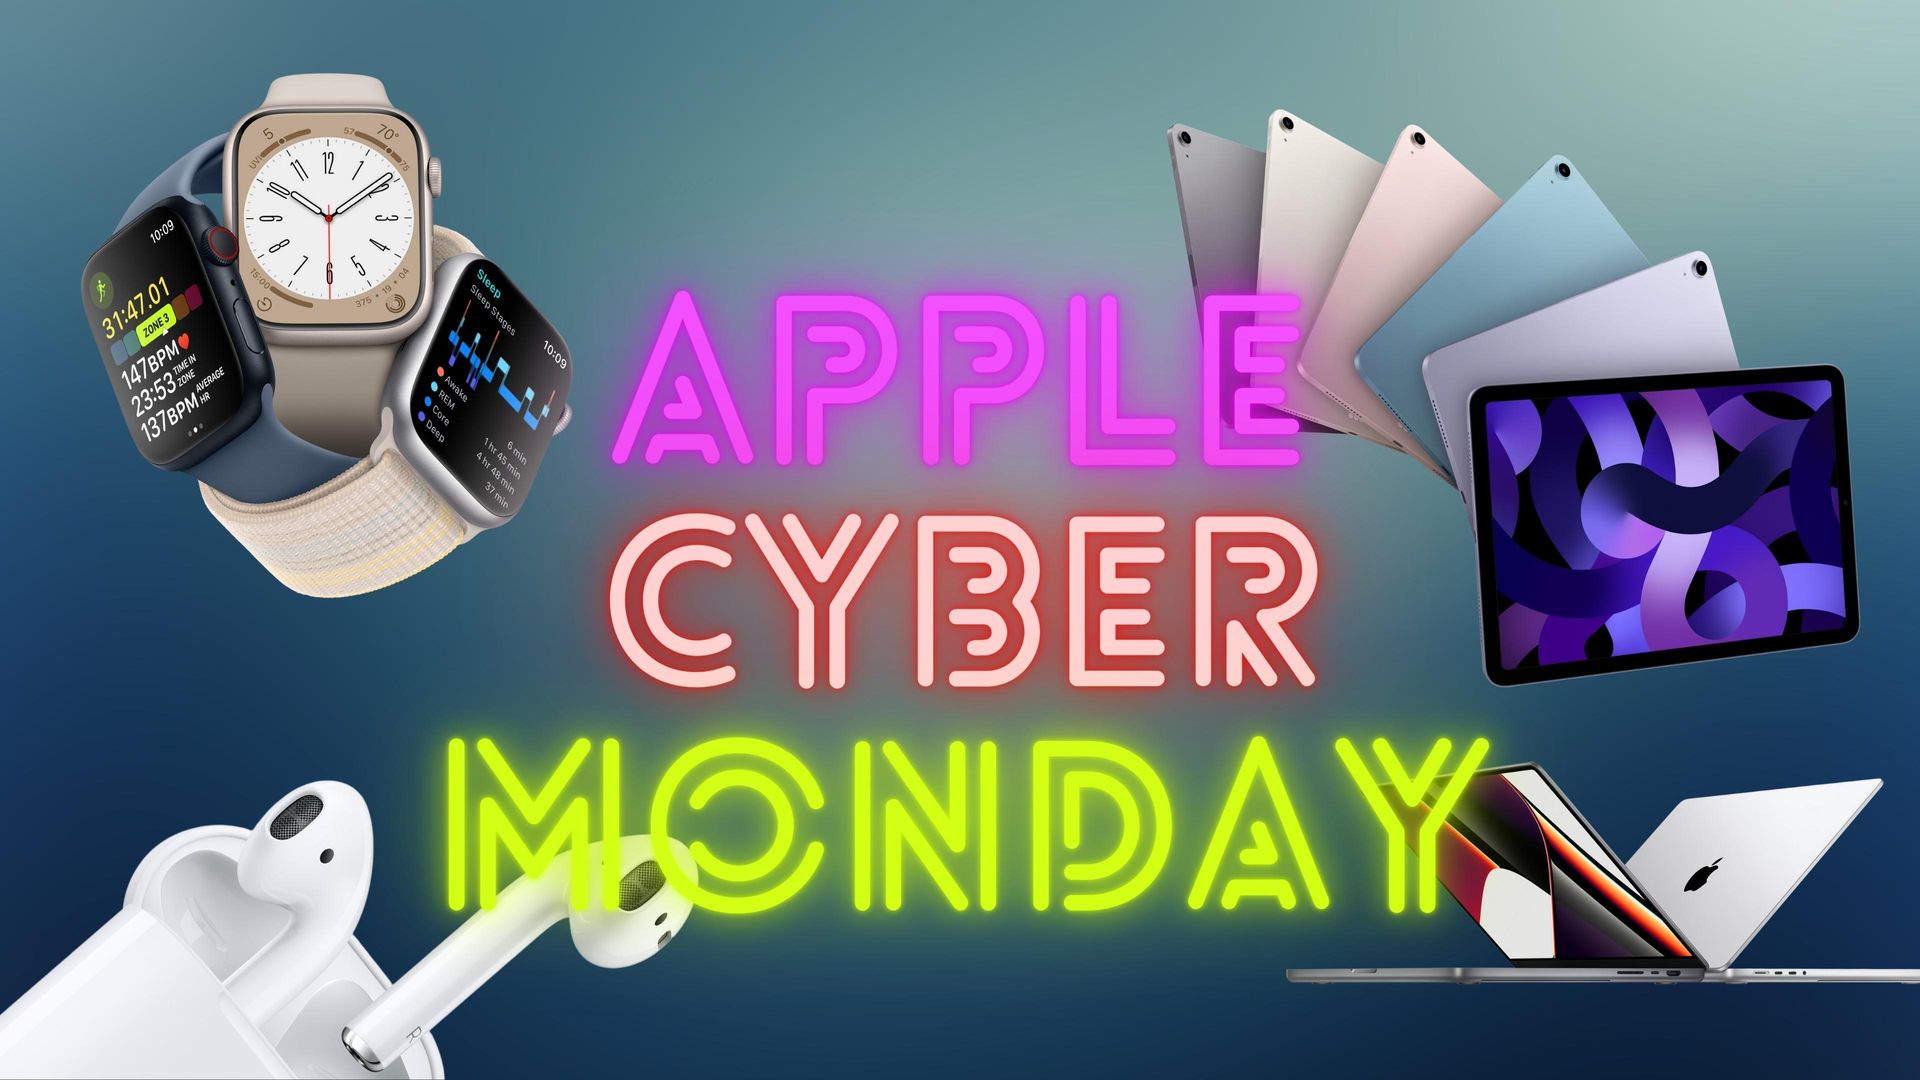 Here are 100+ of the best Apple Cyber Monday deals from Amazon, Best